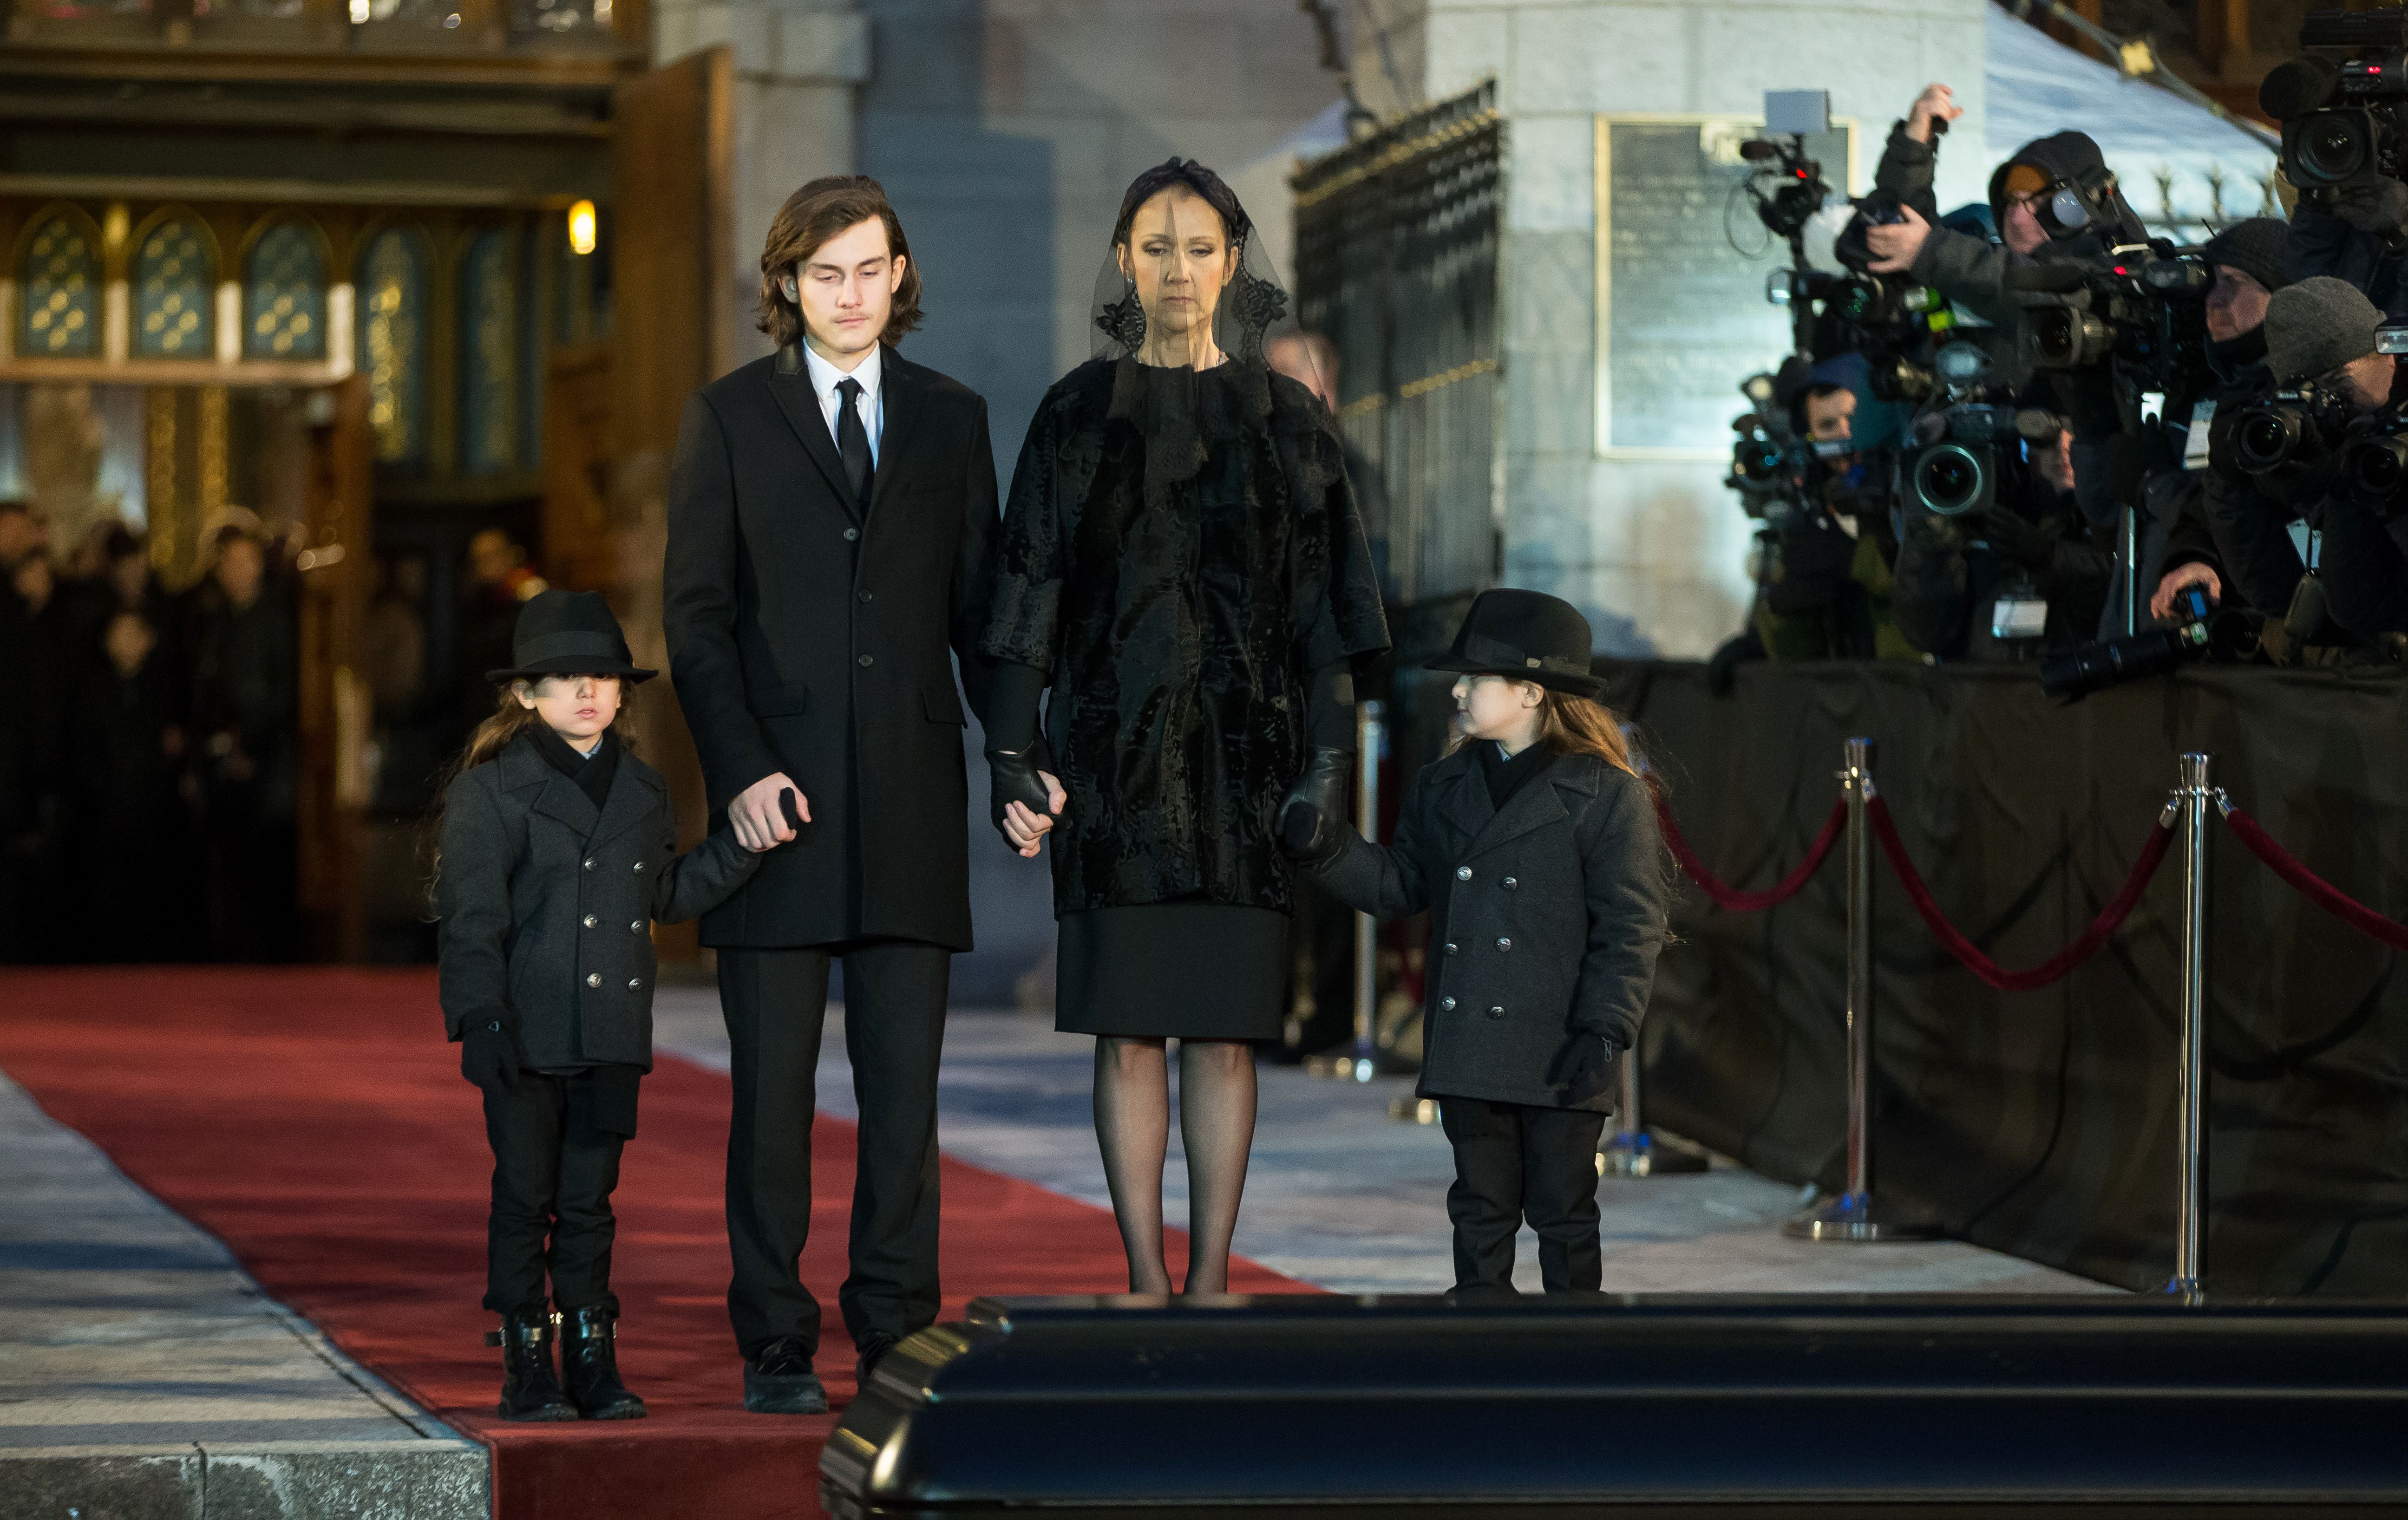 Céline Dion and her sons René-Charle, Eddy, and Nelson, pause to view the casket of René Angélil following his funeral service in Montreal, Quebec, on January 22, 2016. | Source: Getty Images